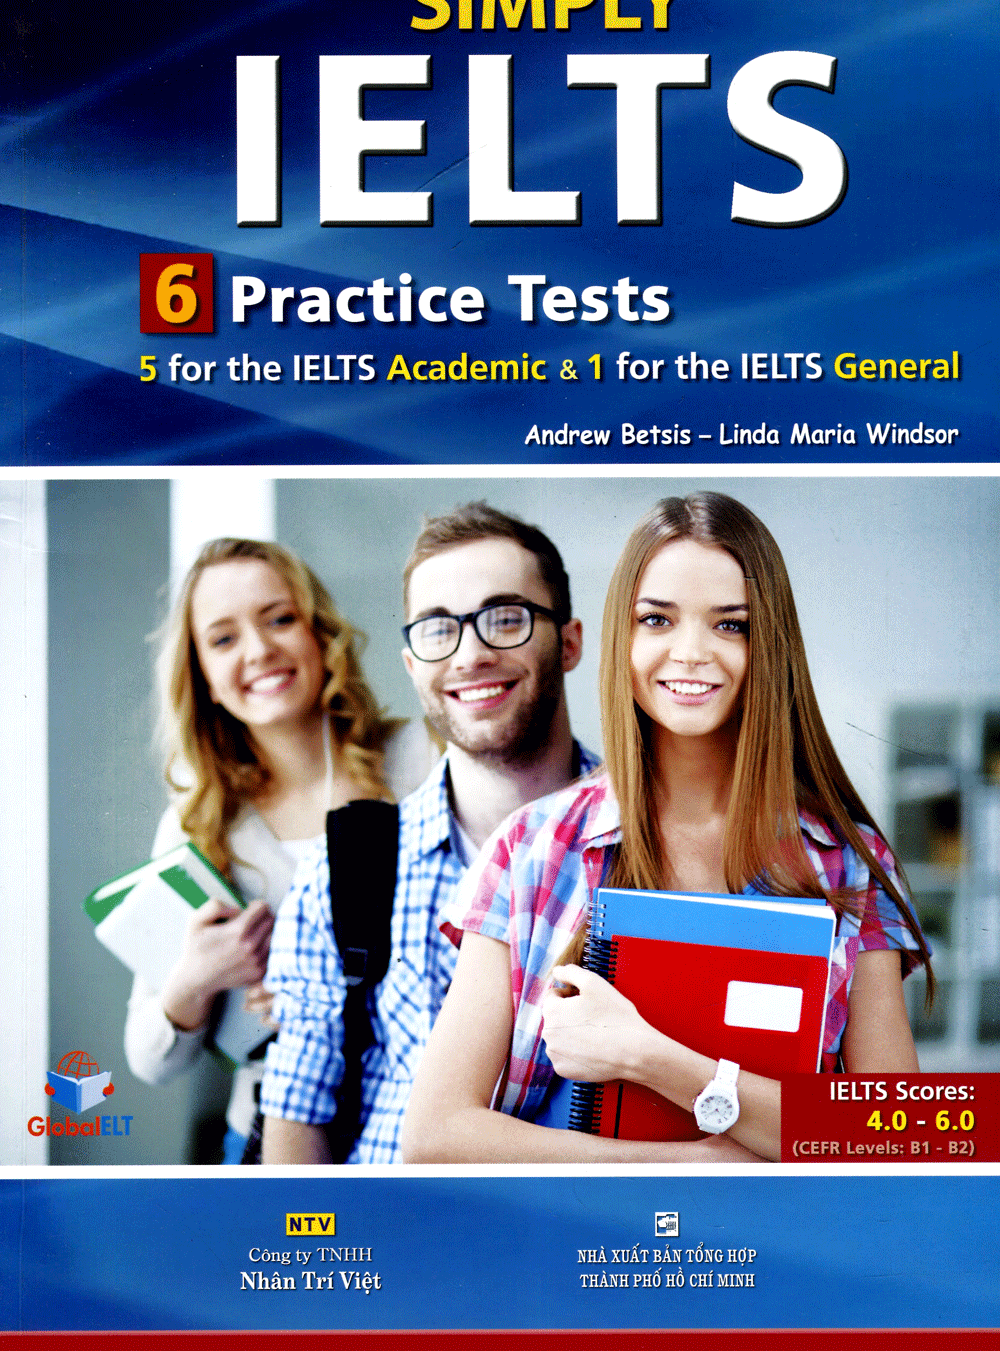  Simply IELTS - 6 Practice Tests 